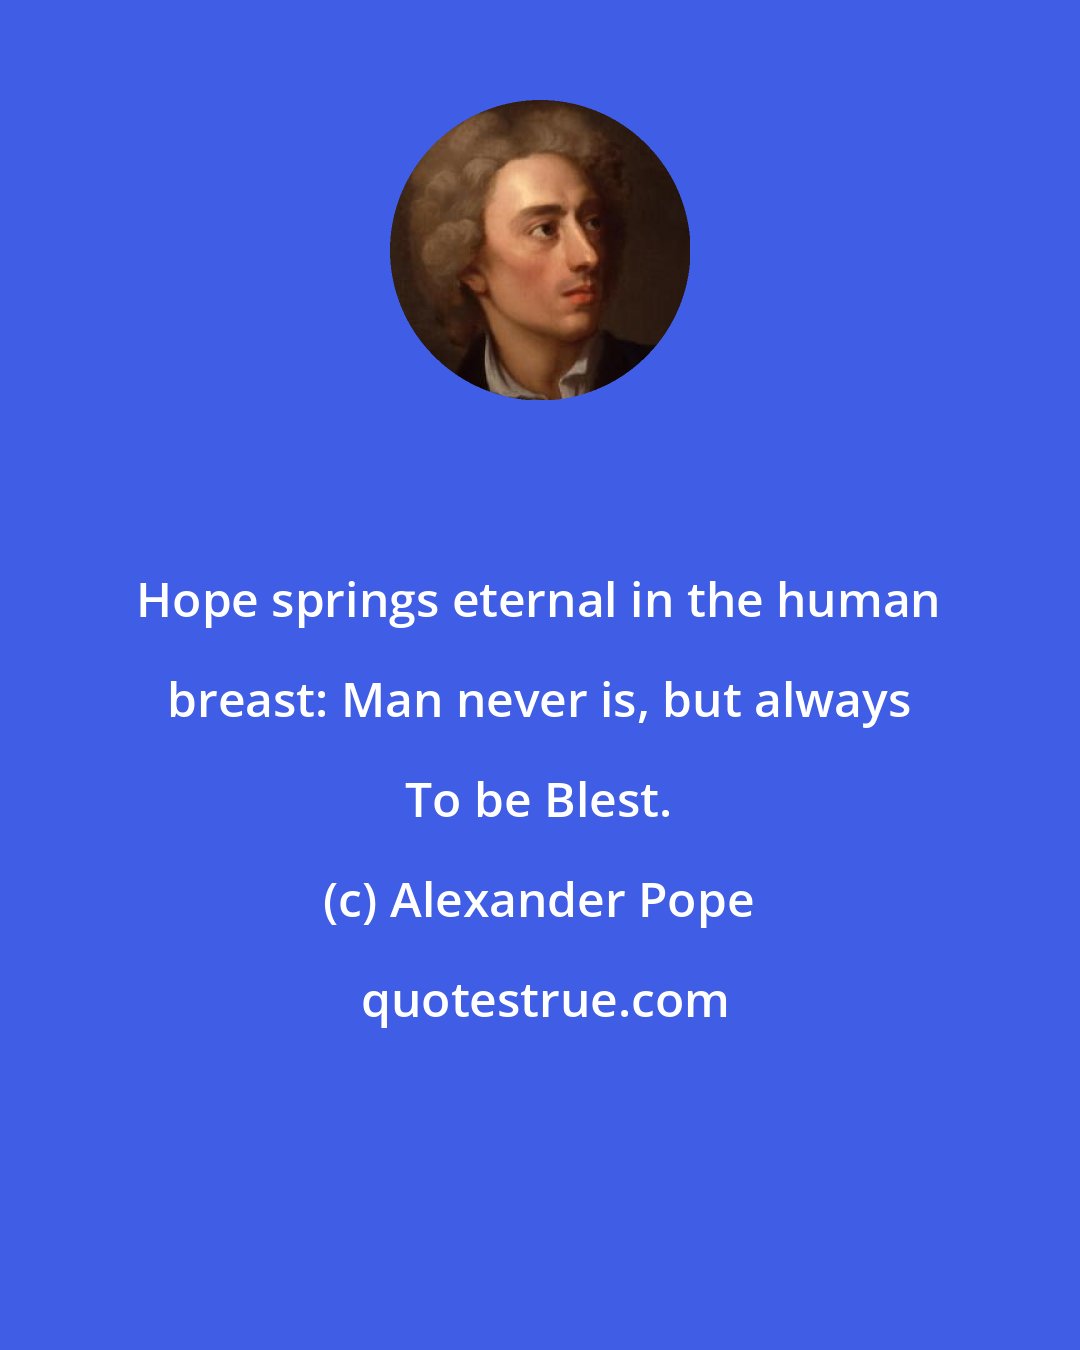 Alexander Pope: Hope springs eternal in the human breast: Man never is, but always To be Blest.